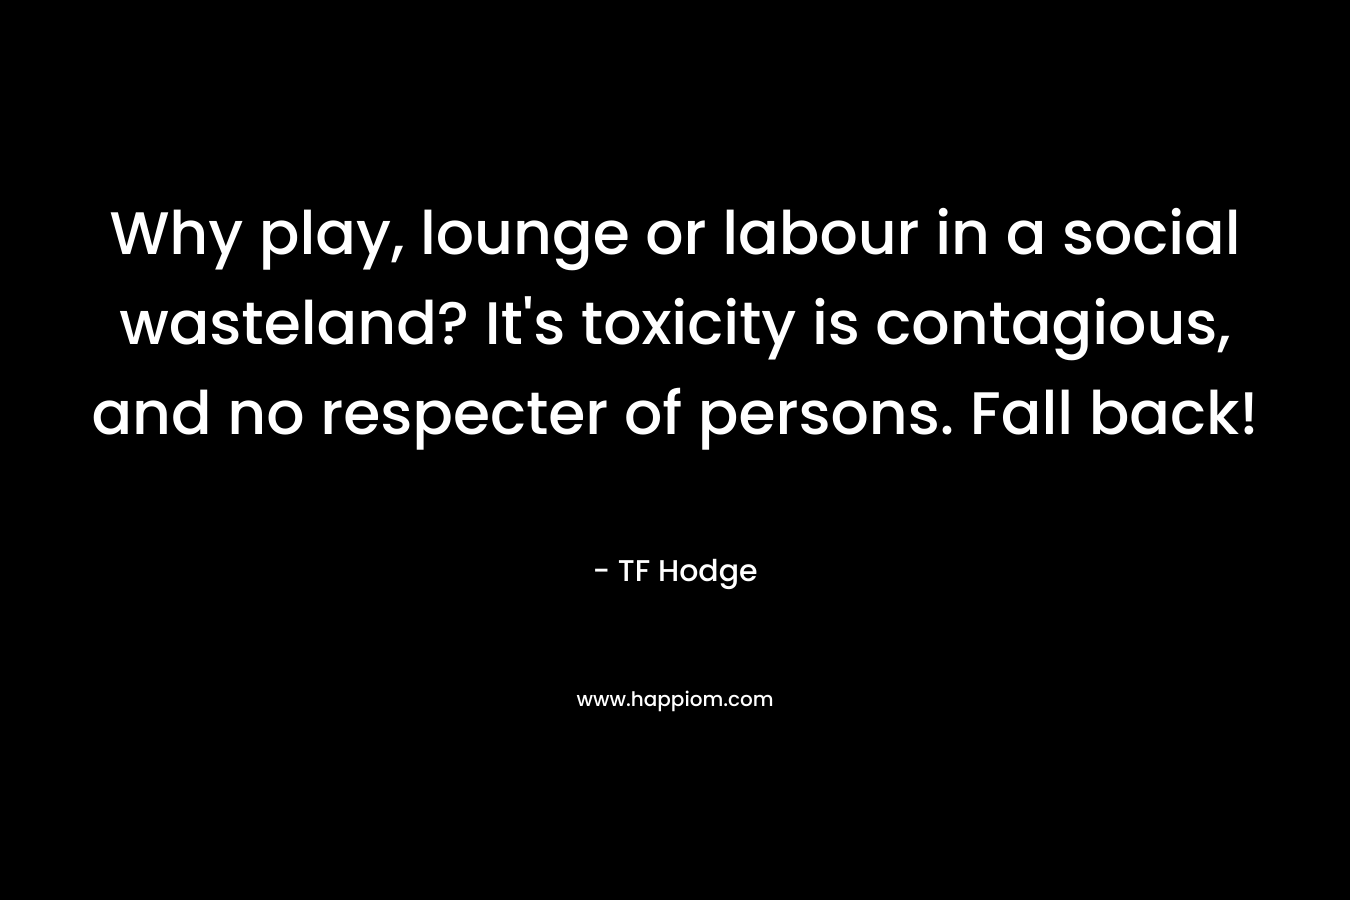 Why play, lounge or labour in a social wasteland? It’s toxicity is contagious, and no respecter of persons. Fall back! – TF Hodge